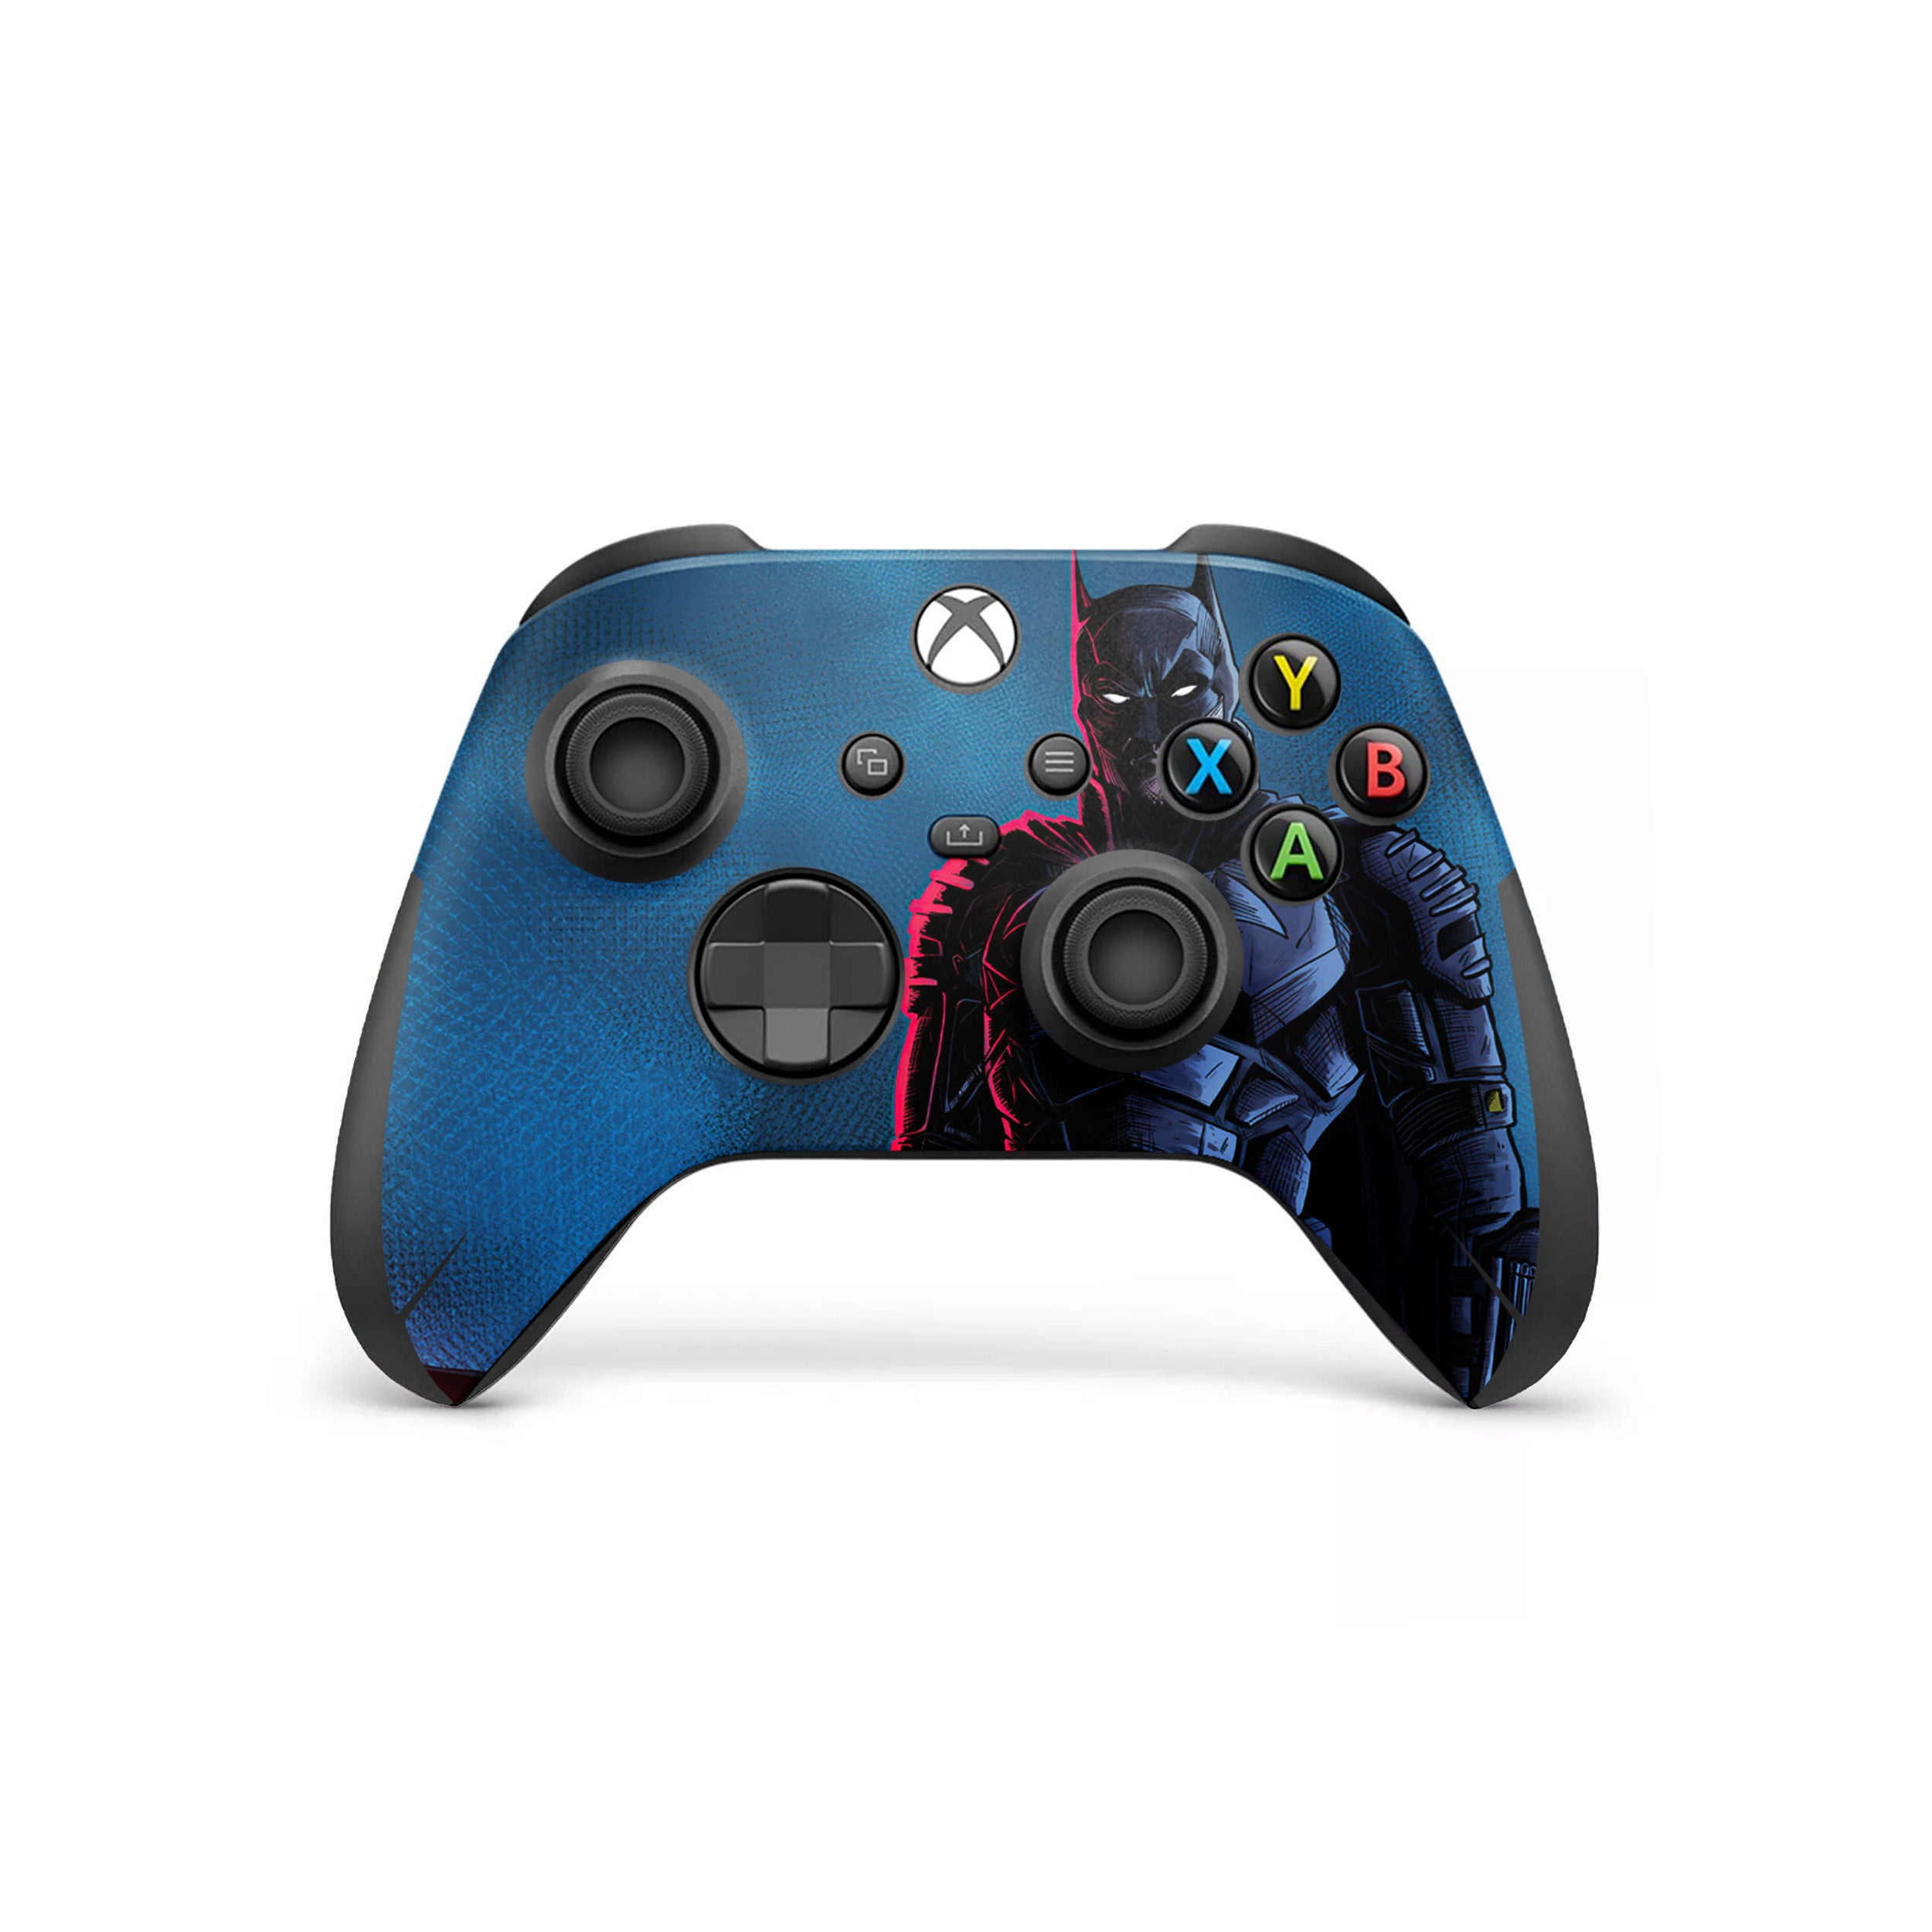 A video game skin featuring a DC Comics Batman design for the Xbox Wireless Controller.